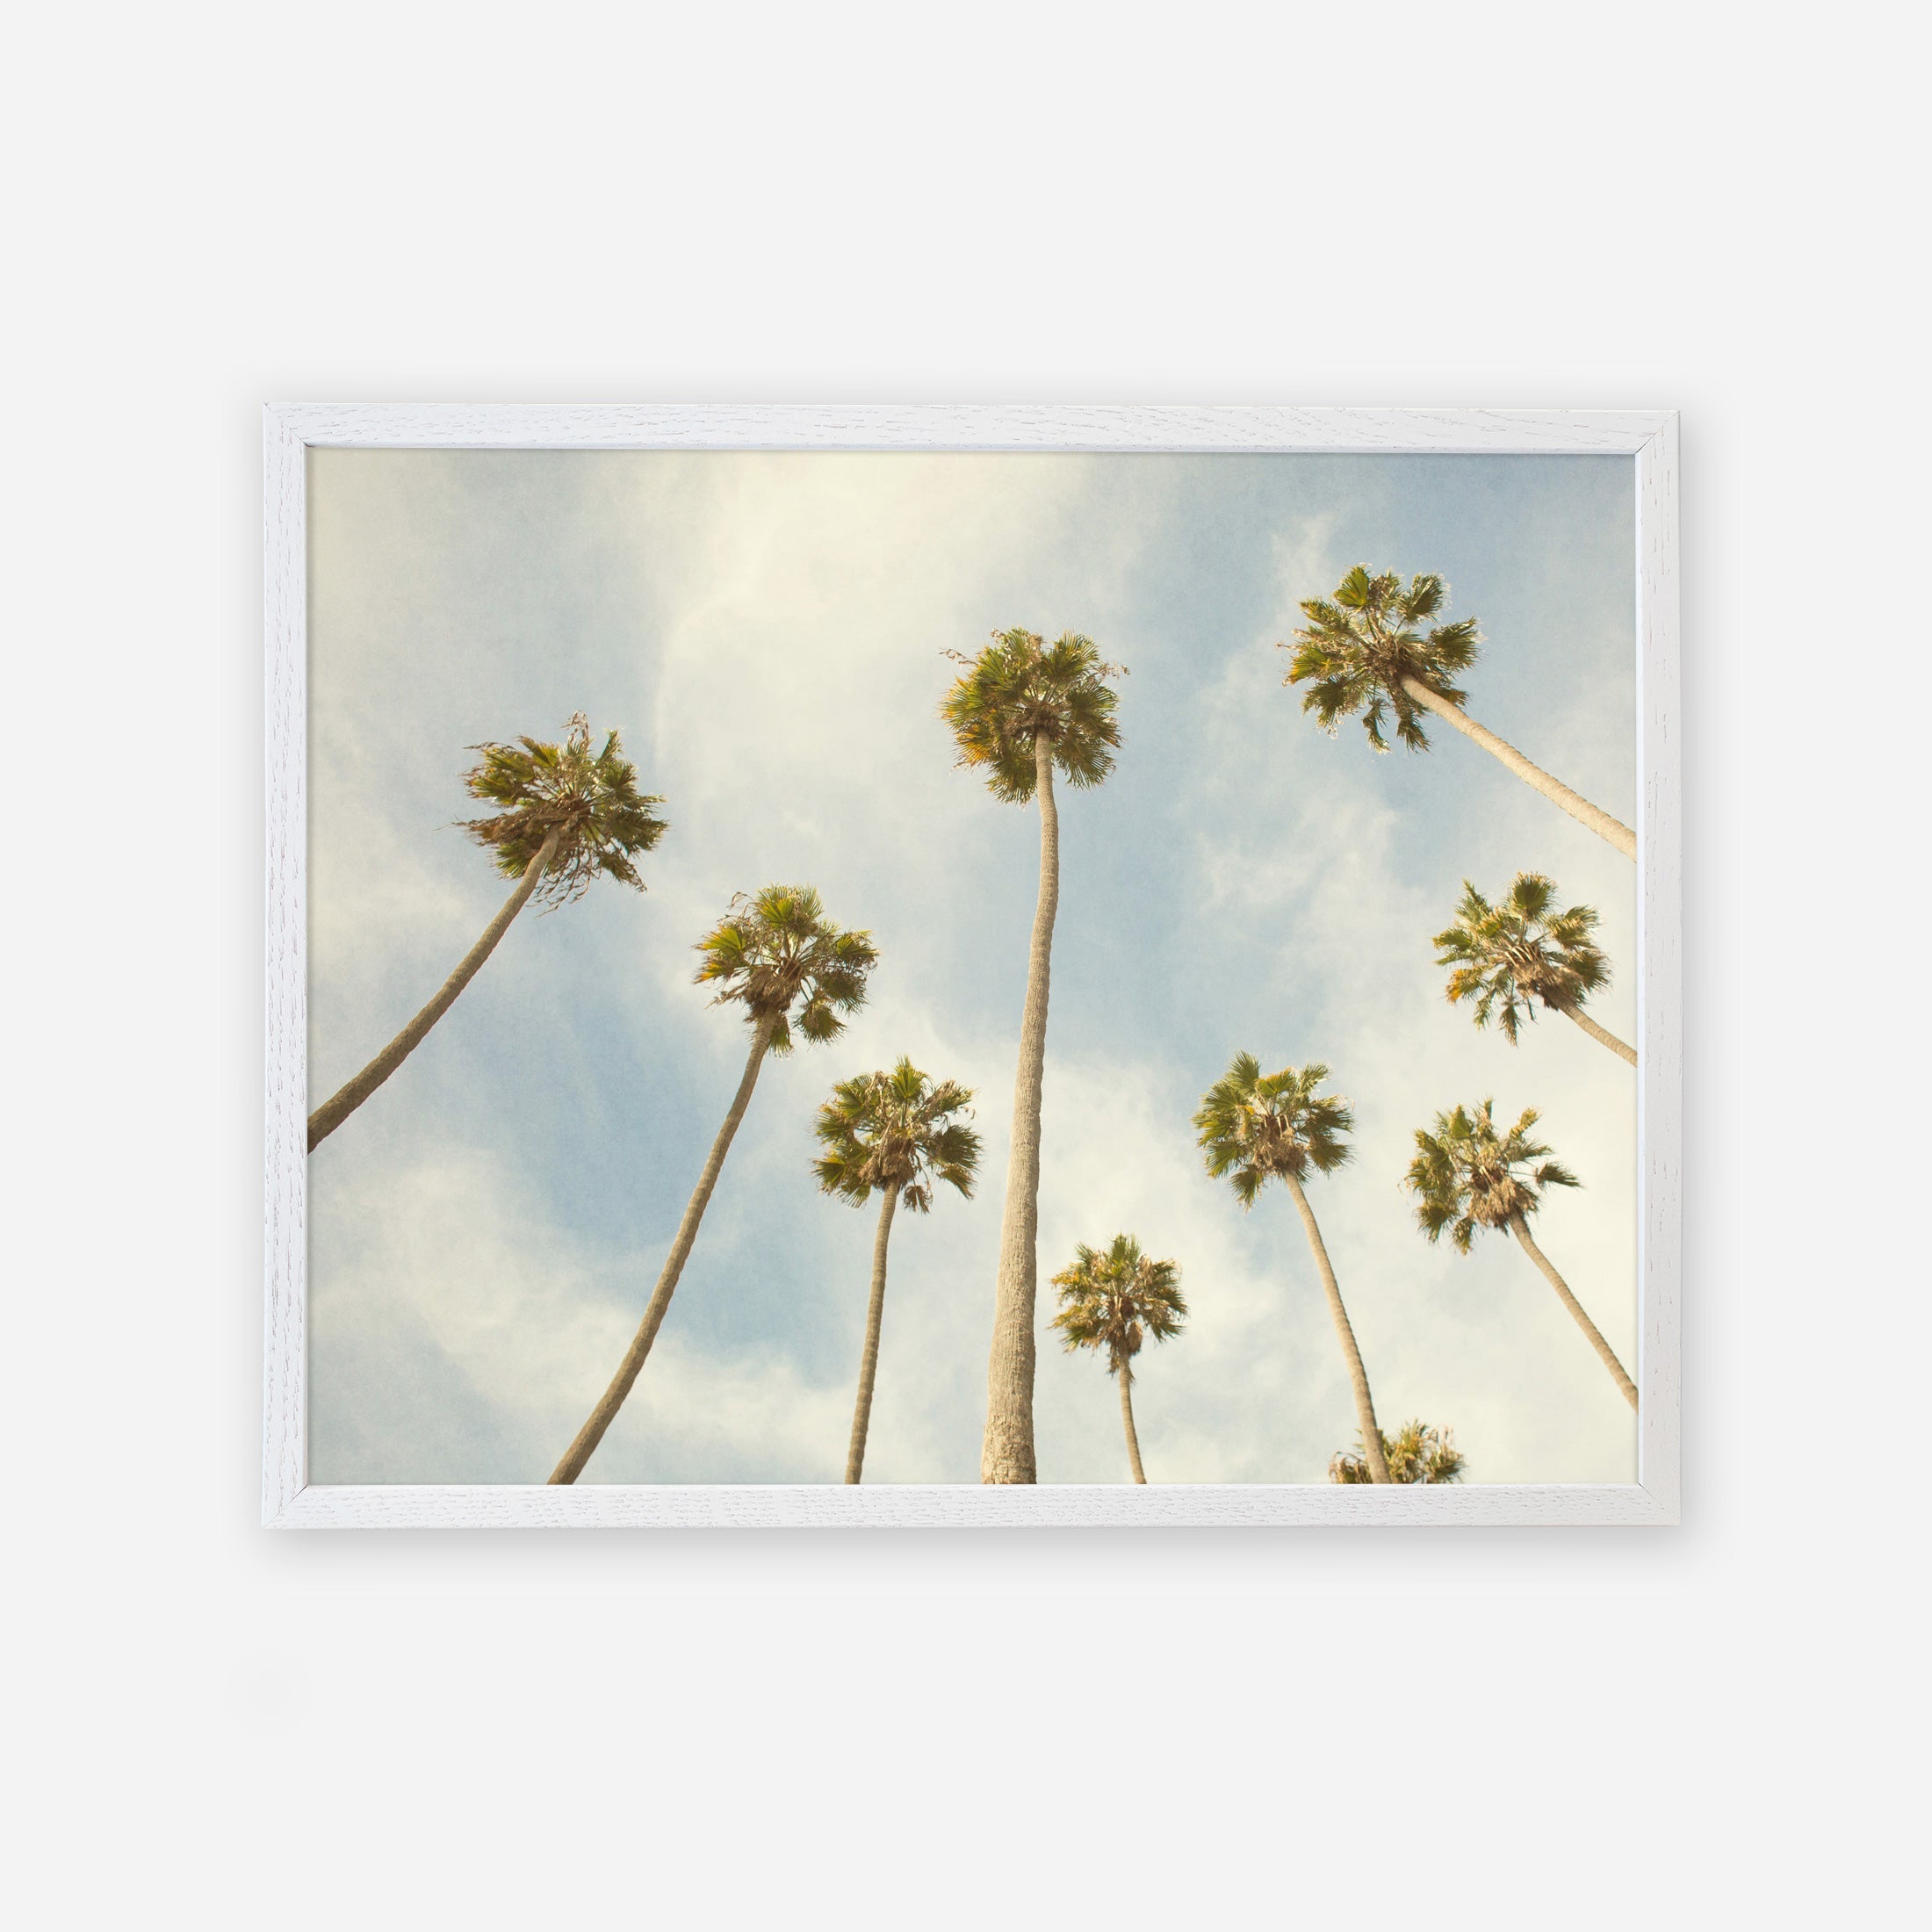 A framed photograph of tall California palm trees viewed from below against a soft cloudy sky, printed on archival photographic paper, creating a beautiful and serene nature scene. This is the Offley Green Palm Tree Print, California Beach Scene &#39;Reach for the Palms&#39;.